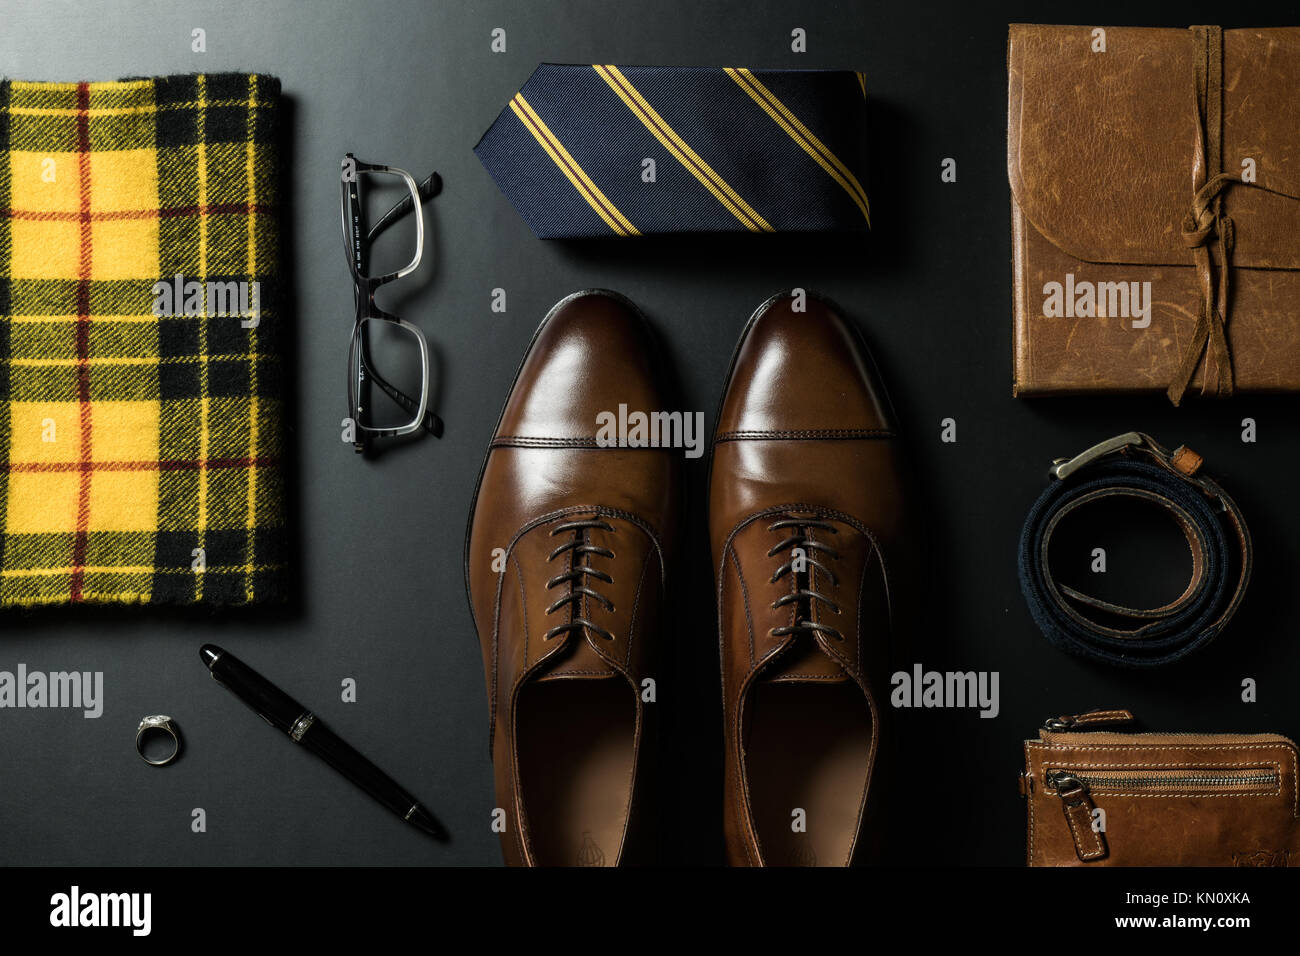 Men's business fashion clothing and accessories flatlay Stock Photo